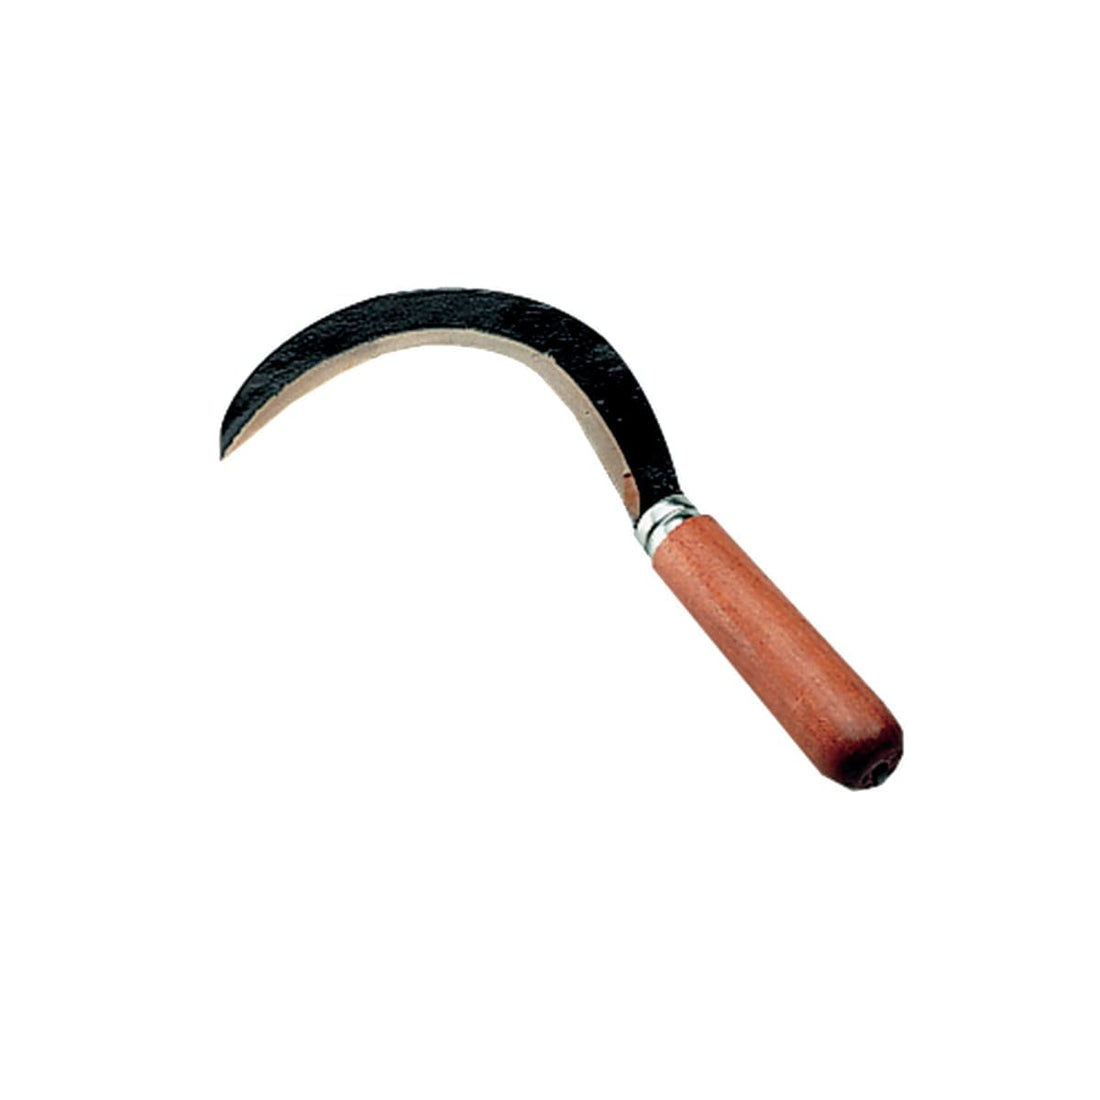 FORGED NAG WITH WOODEN HANDLE - best price from Maltashopper.com BR500100056